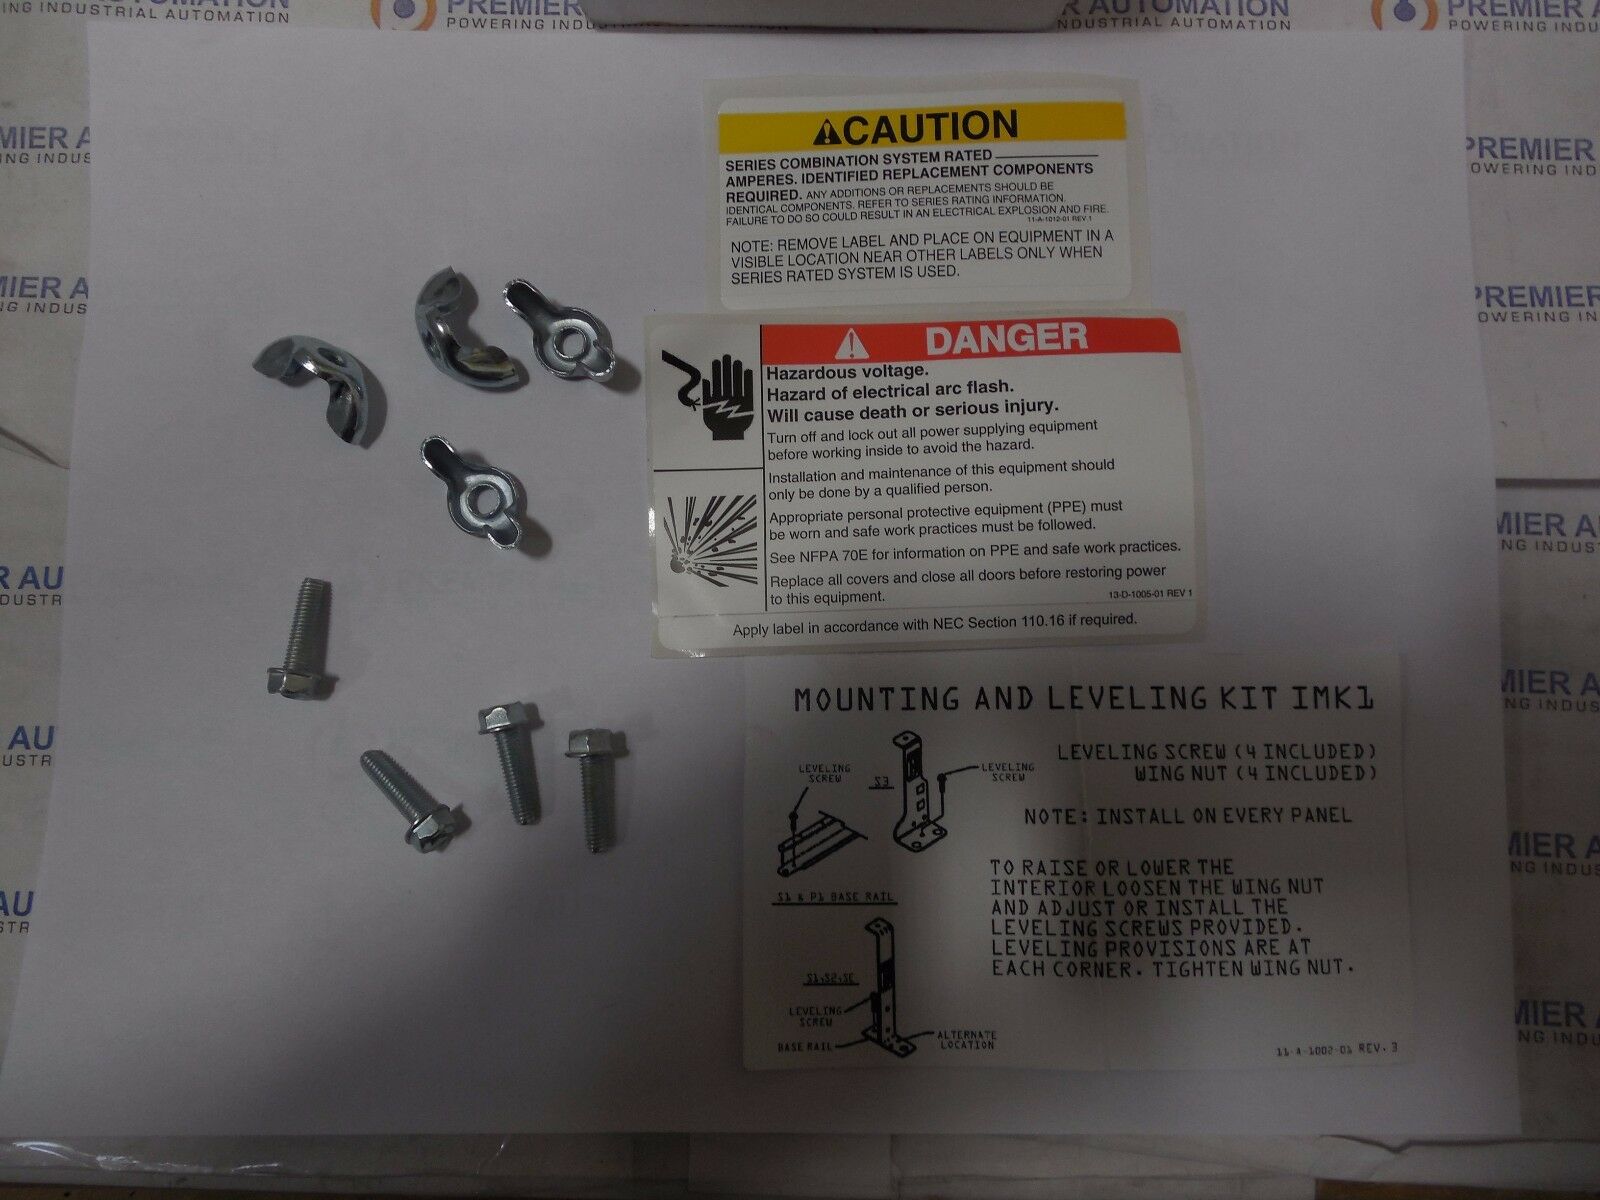 Siemens IMK1 Mounting and Leveling Kit **Free Shipping** 